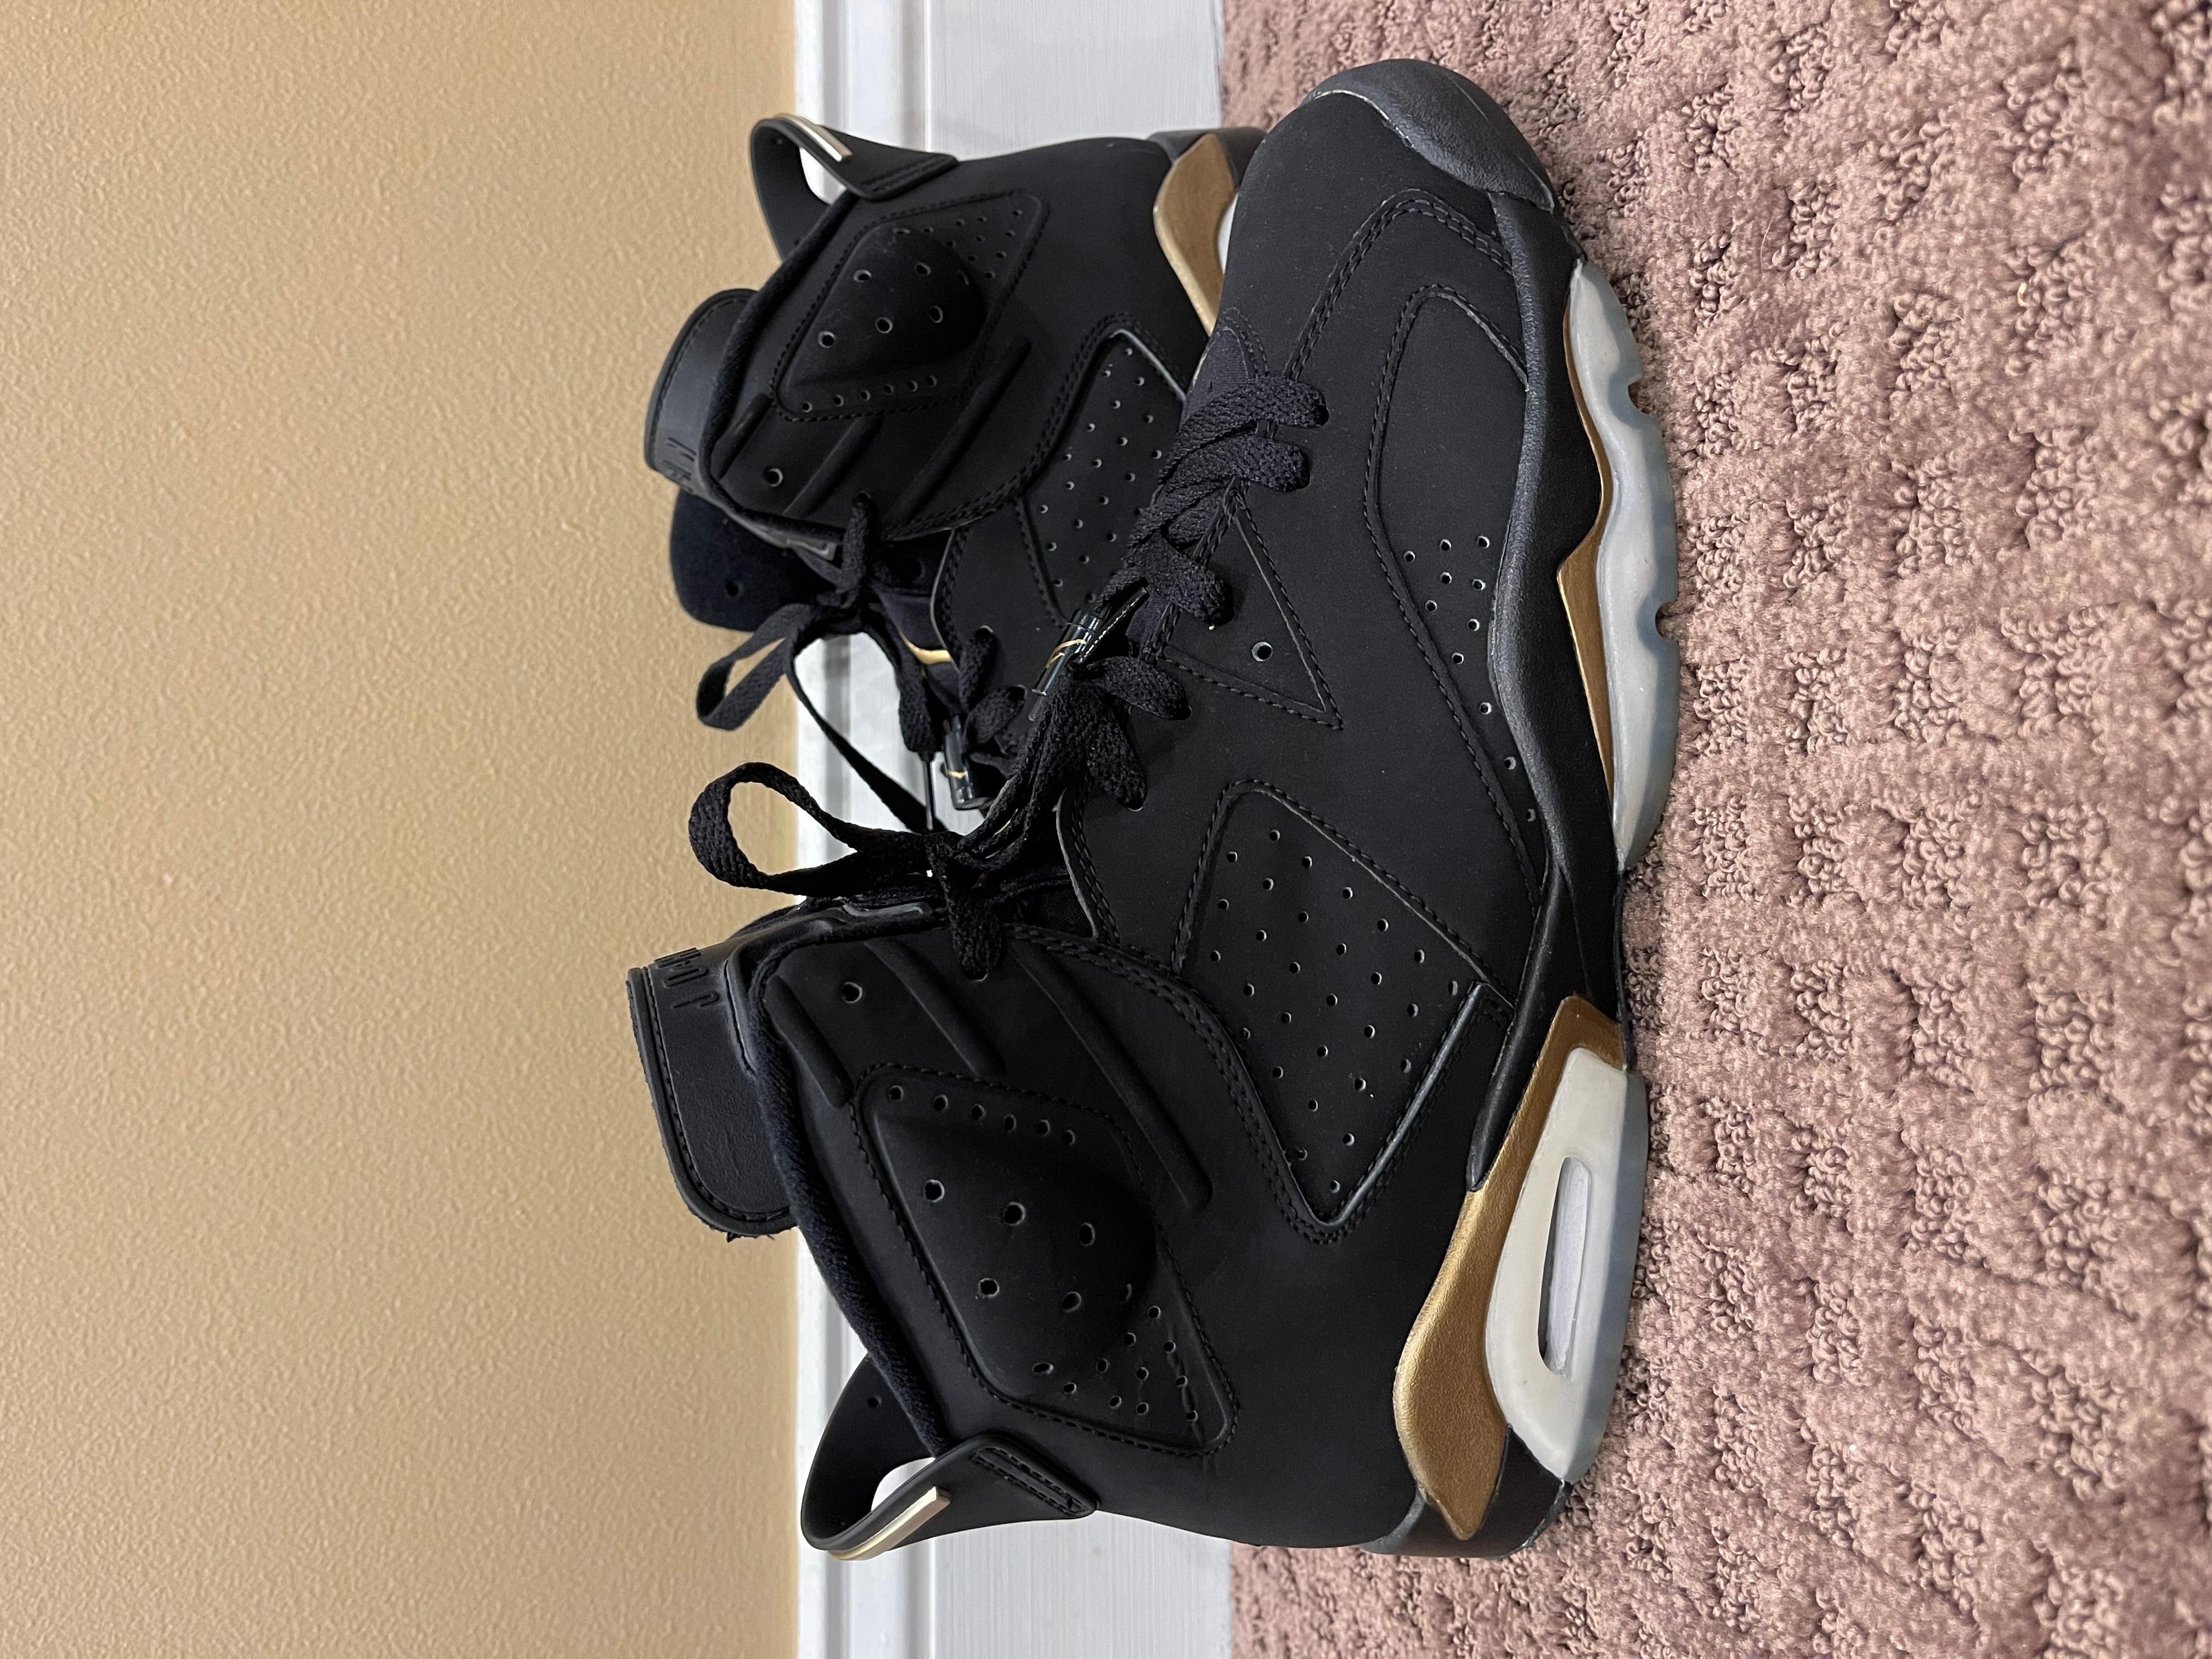 Air Jordan 6 Retro+ Defining Moments DMP 2006
Size 11

Excellent condition (amazing for its age)
Please understand that this is an older shoe and wear at your own risk

No box, will be shipped with care inside cardboard box and correct foam / paper